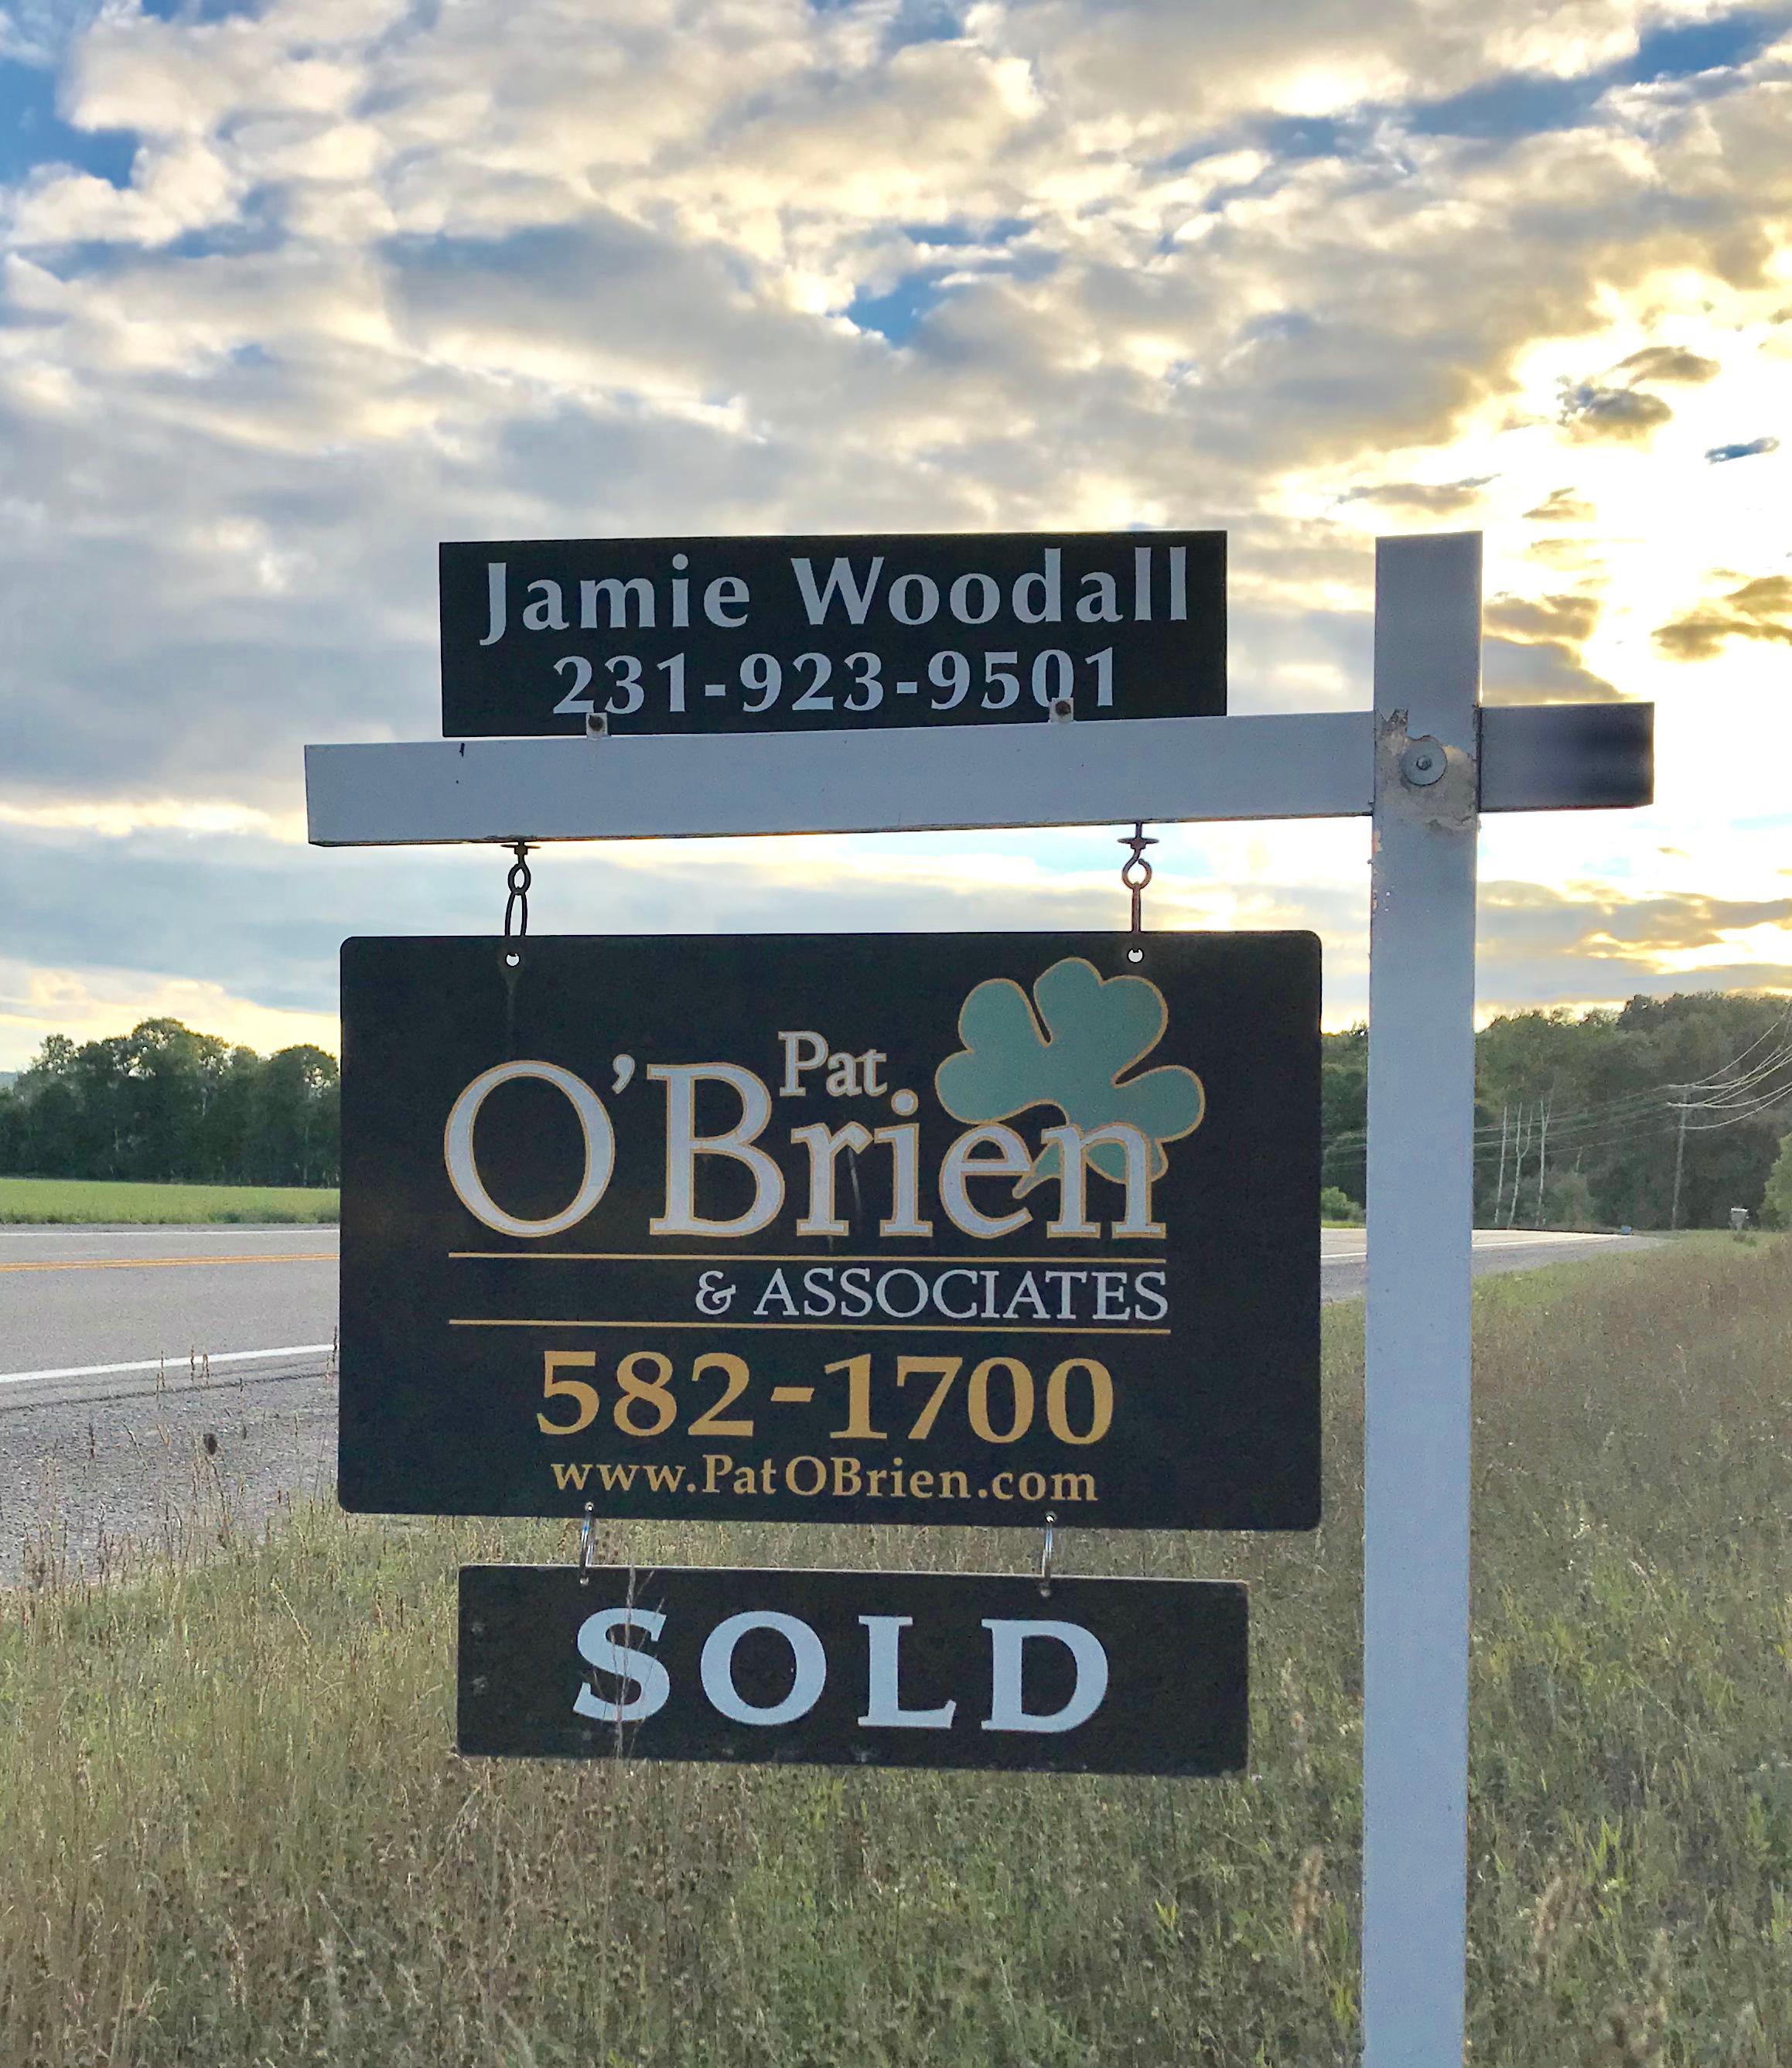 Jamie Woodall Associate Broker with Pat O'Brien & Associates.  Selling faster and higher with added UHD Targeted Digital Marketing.